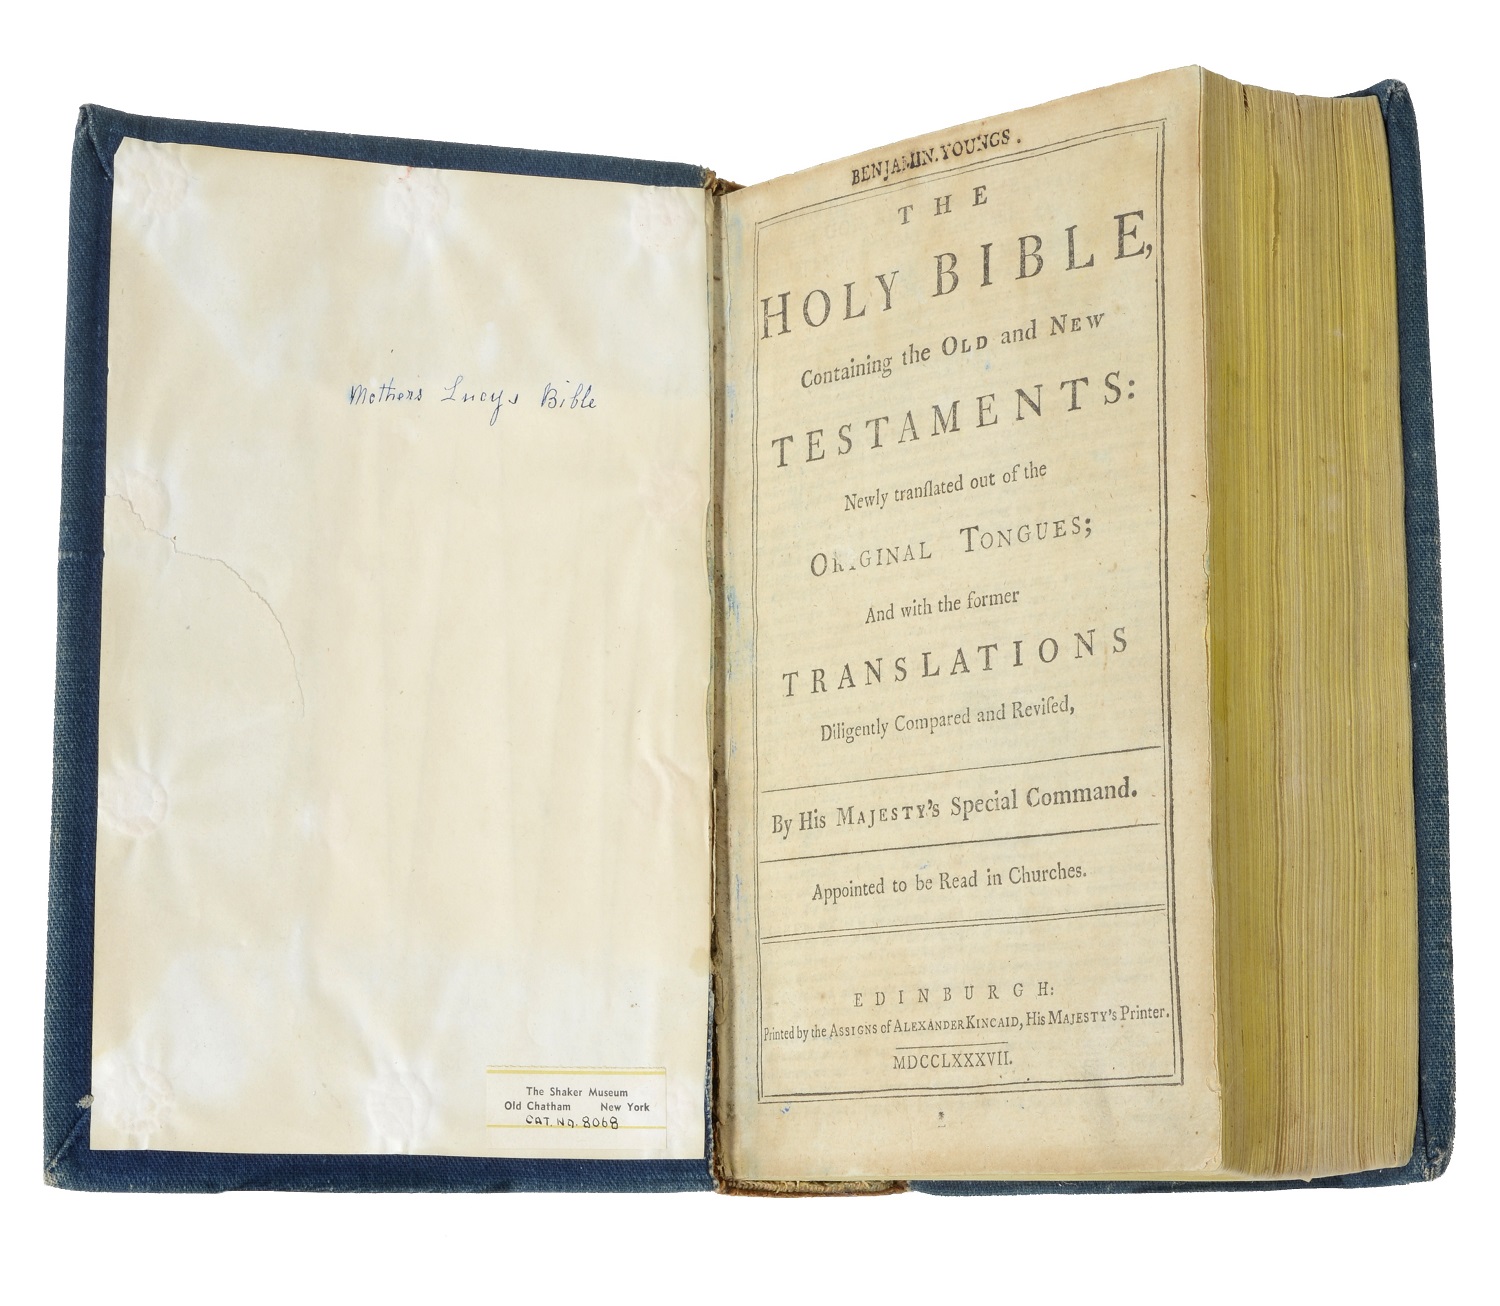 The holy bible, the testaments, and other translations.